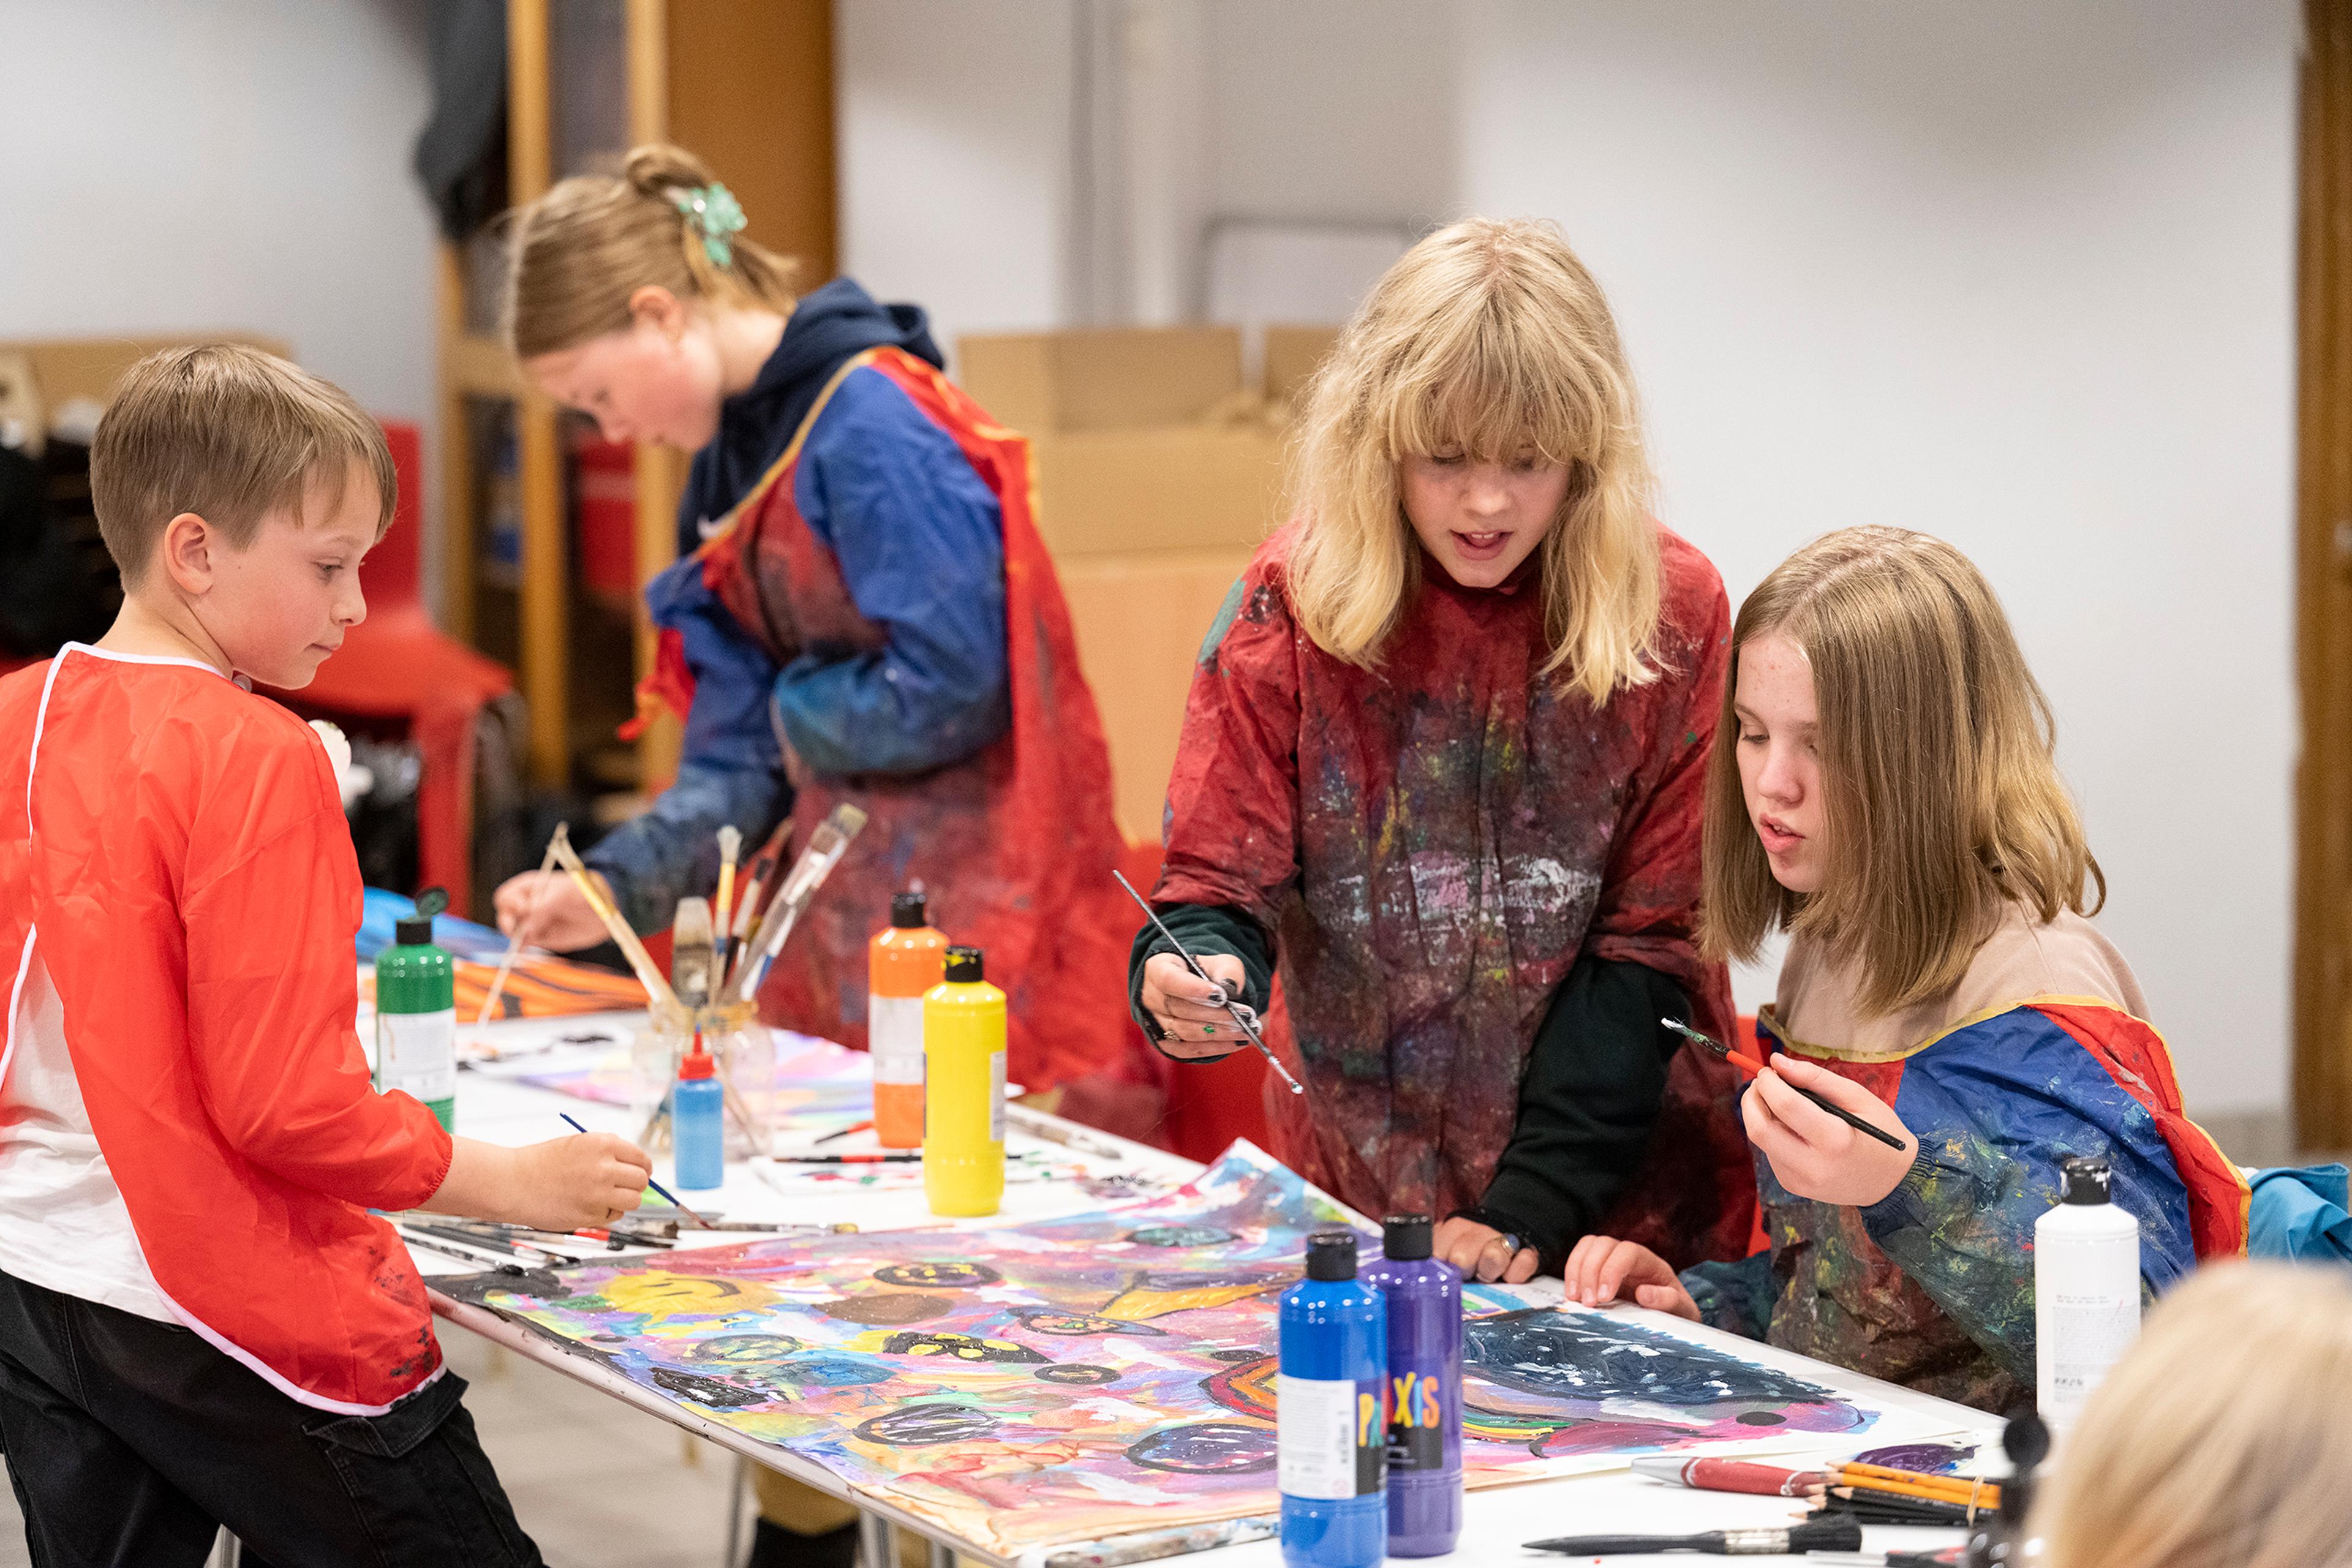 A group of children in one of our studios, painting.